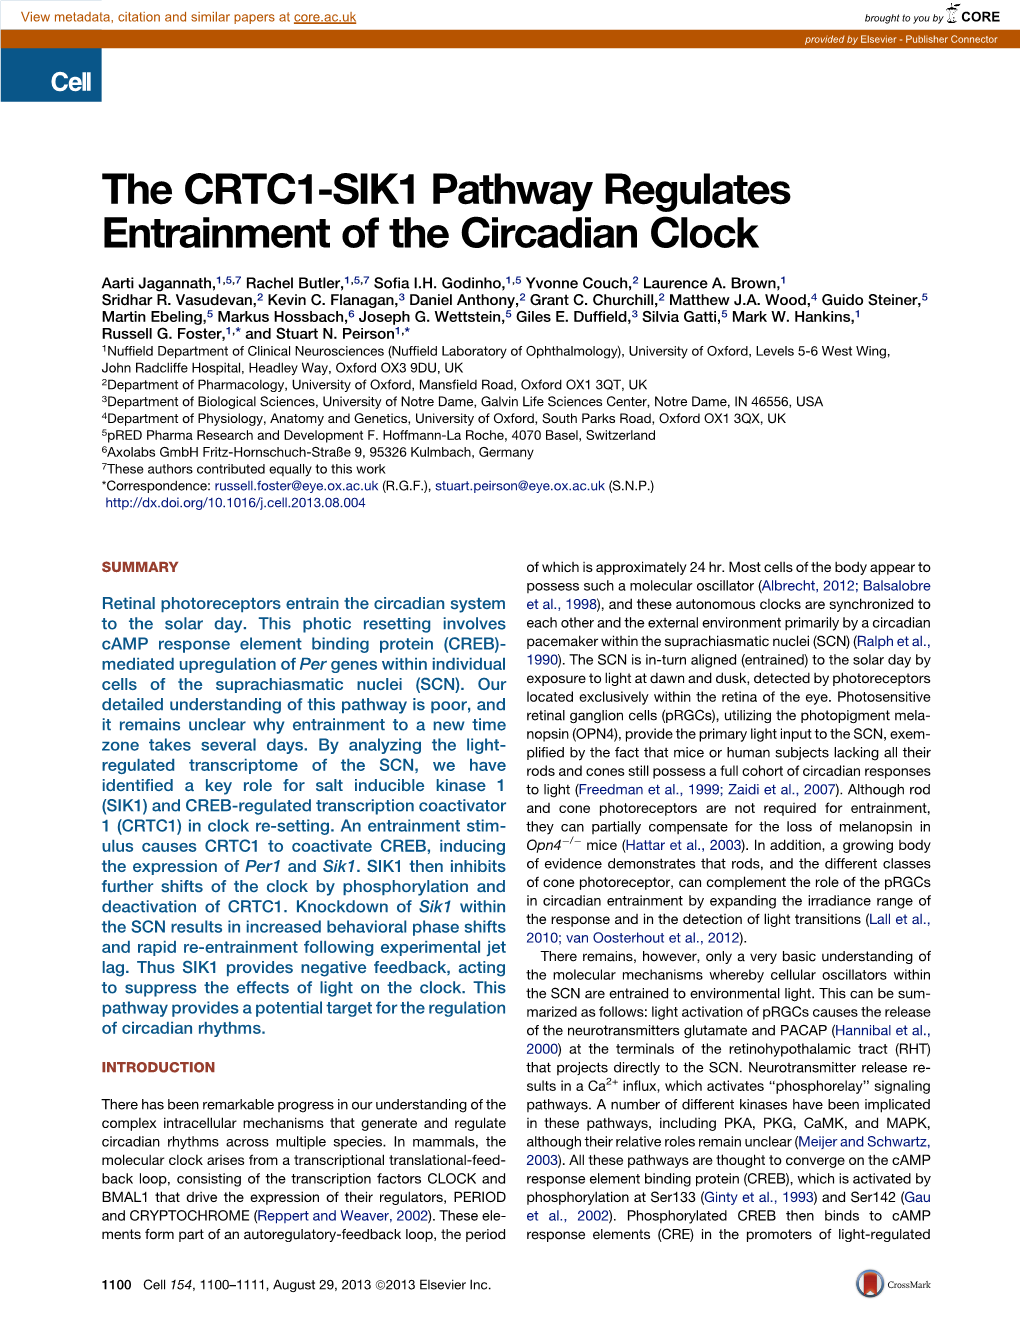 The CRTC1-SIK1 Pathway Regulates Entrainment of the Circadian Clock